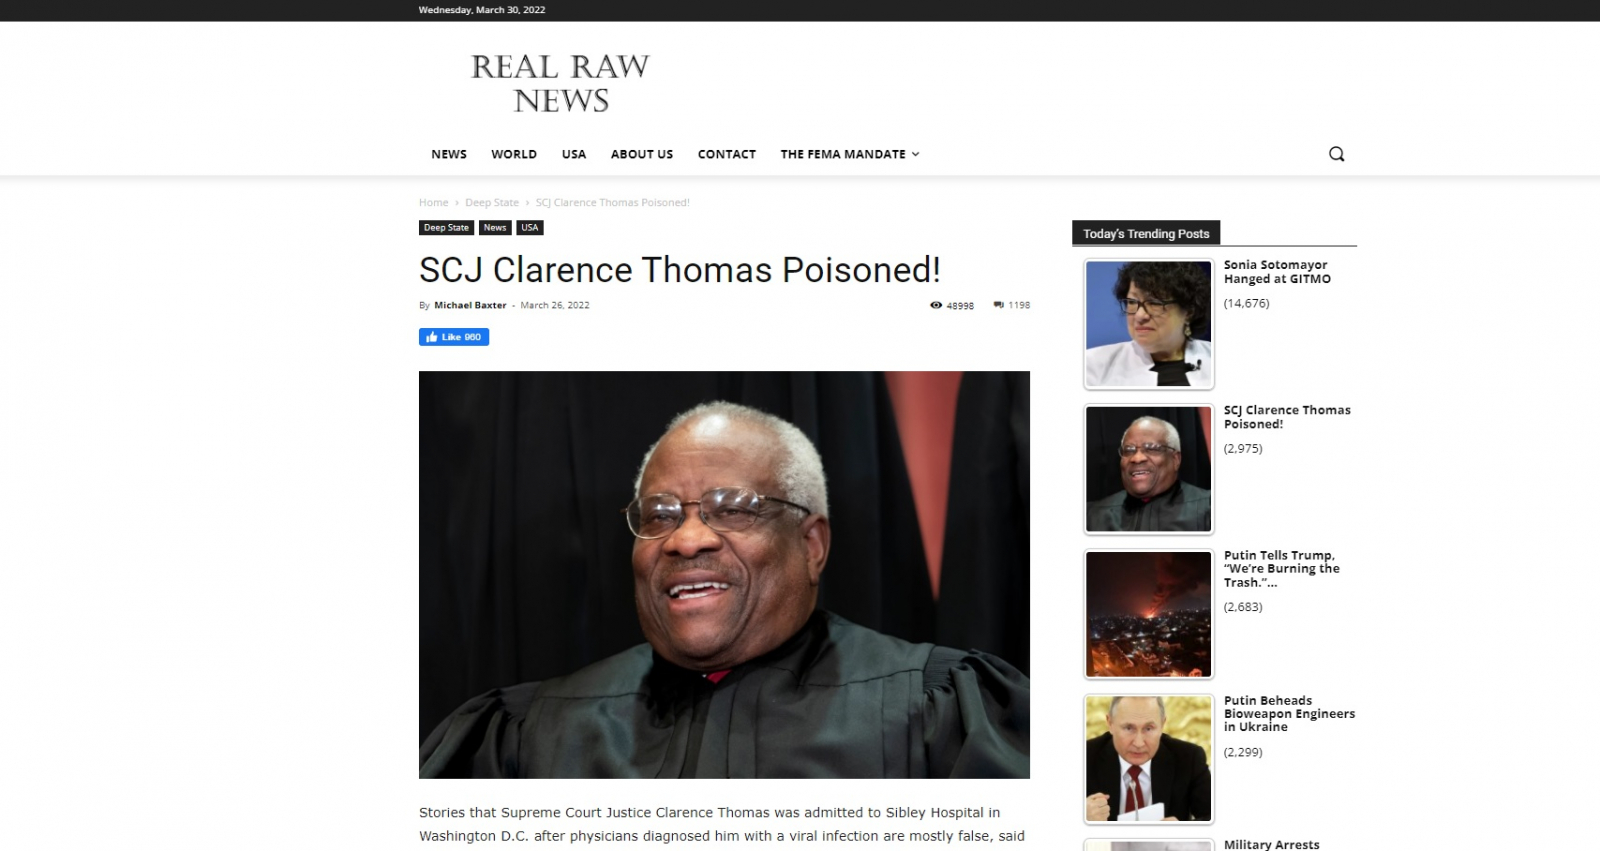 FACT CHECK: Was Supreme Court Justice Clarence Thomas Poisoned?